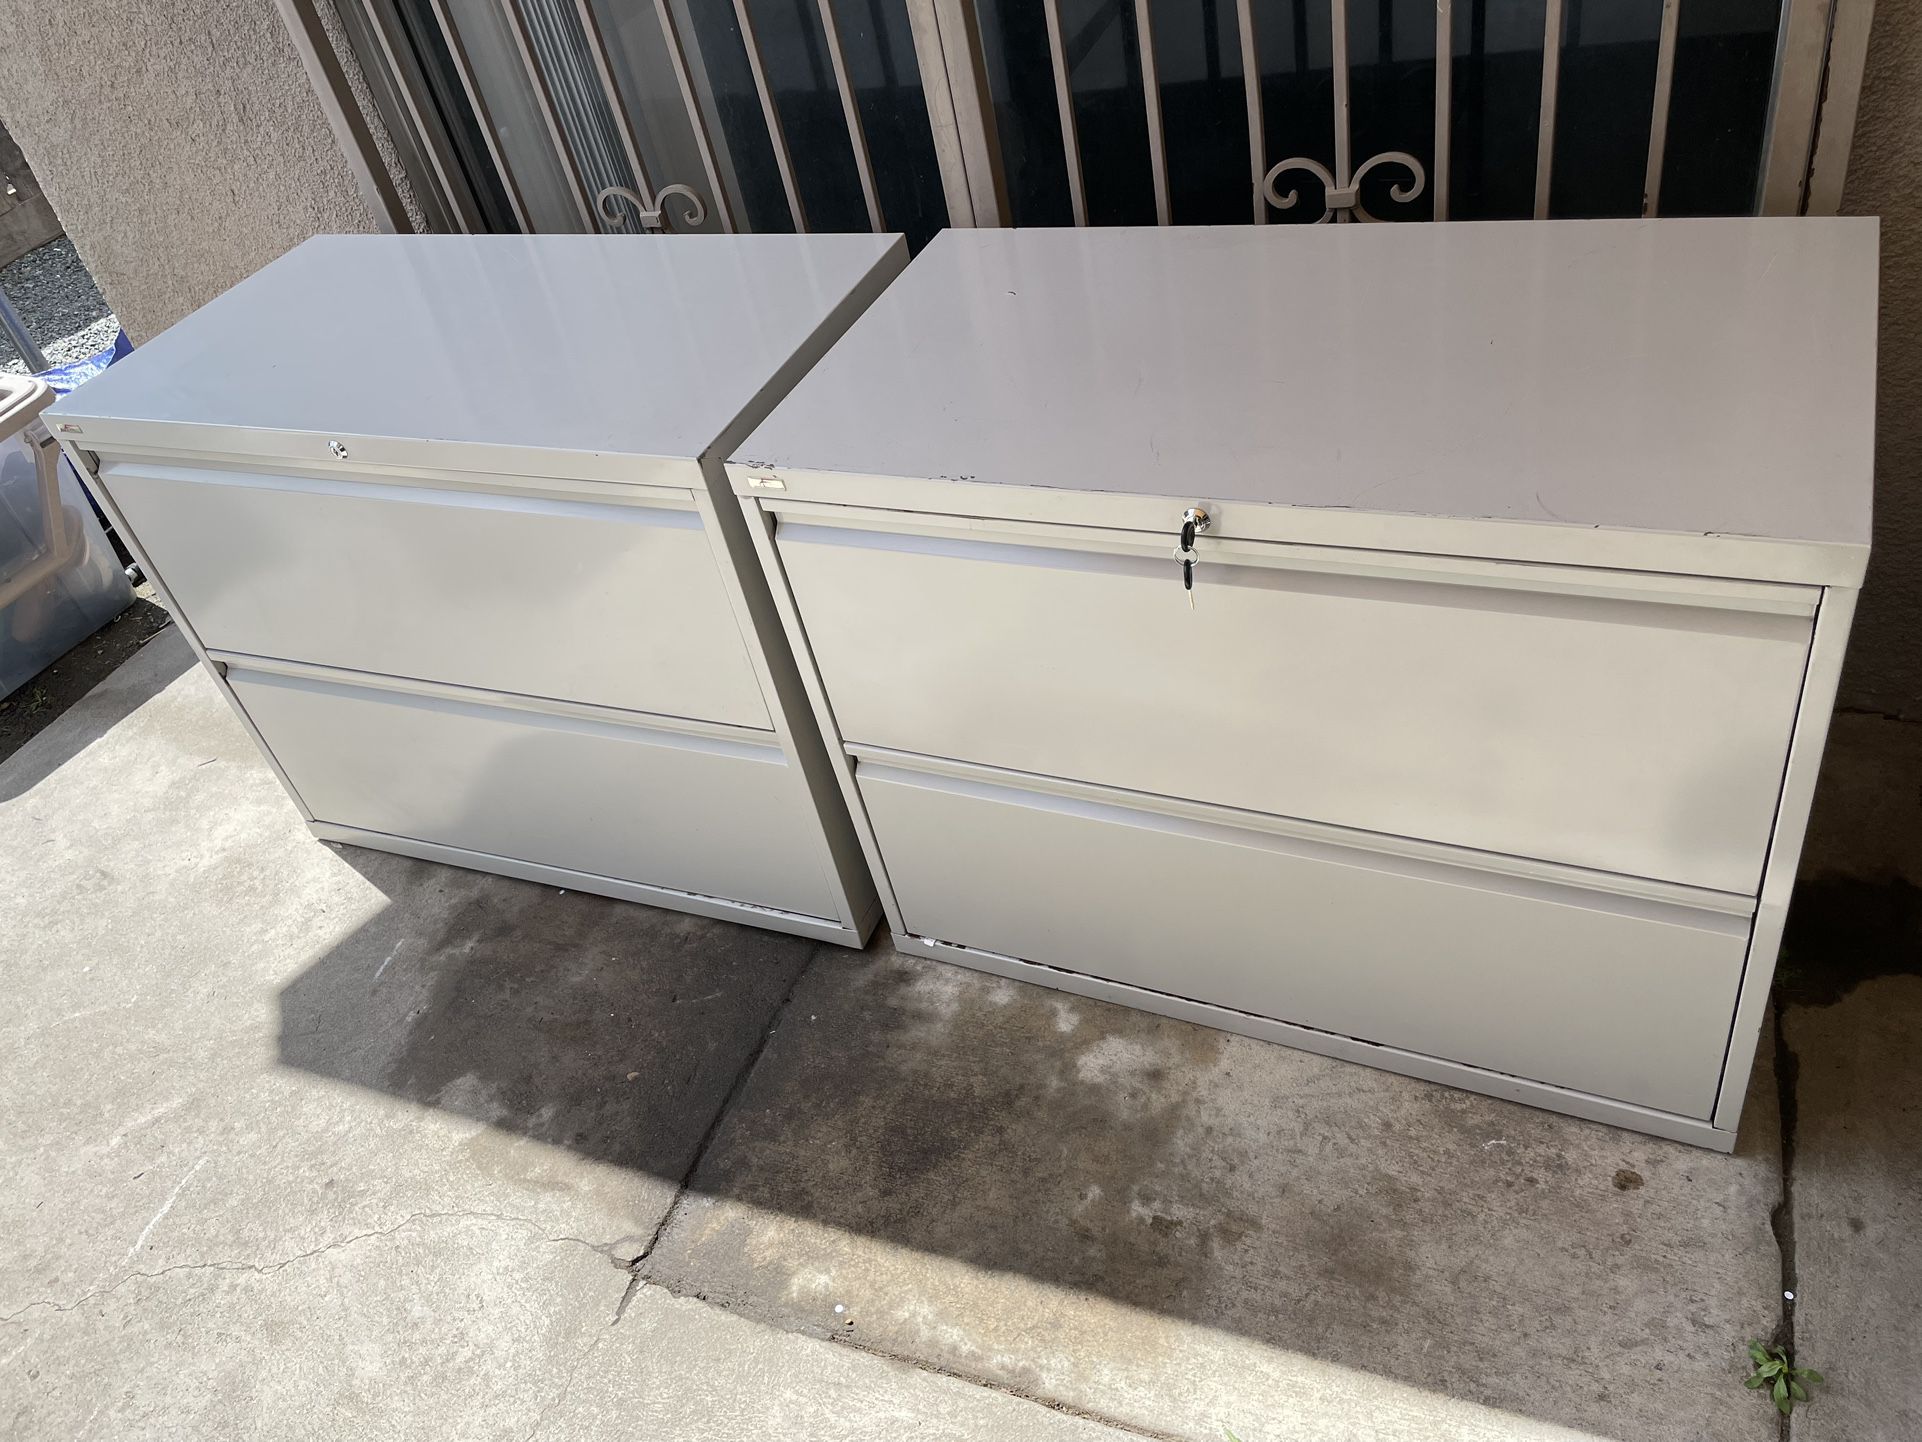 Alera 2 Drawer Lateral File Cabinet ($120 both)